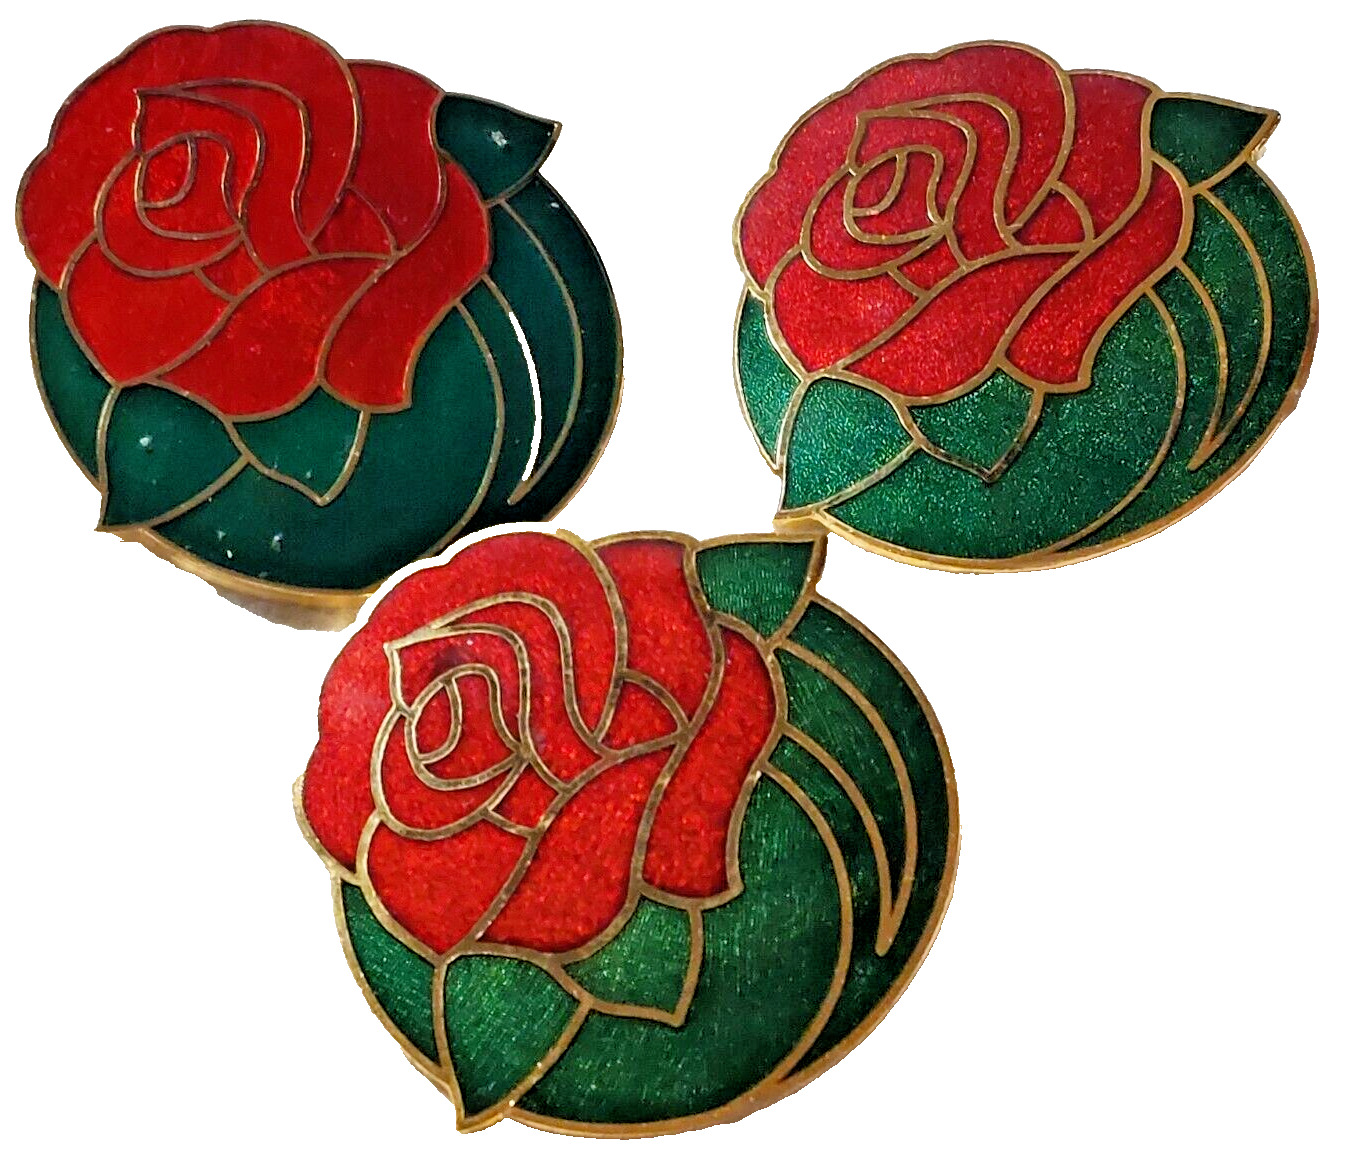 Rose Parade Flower 2 inch Pins Lot of 3